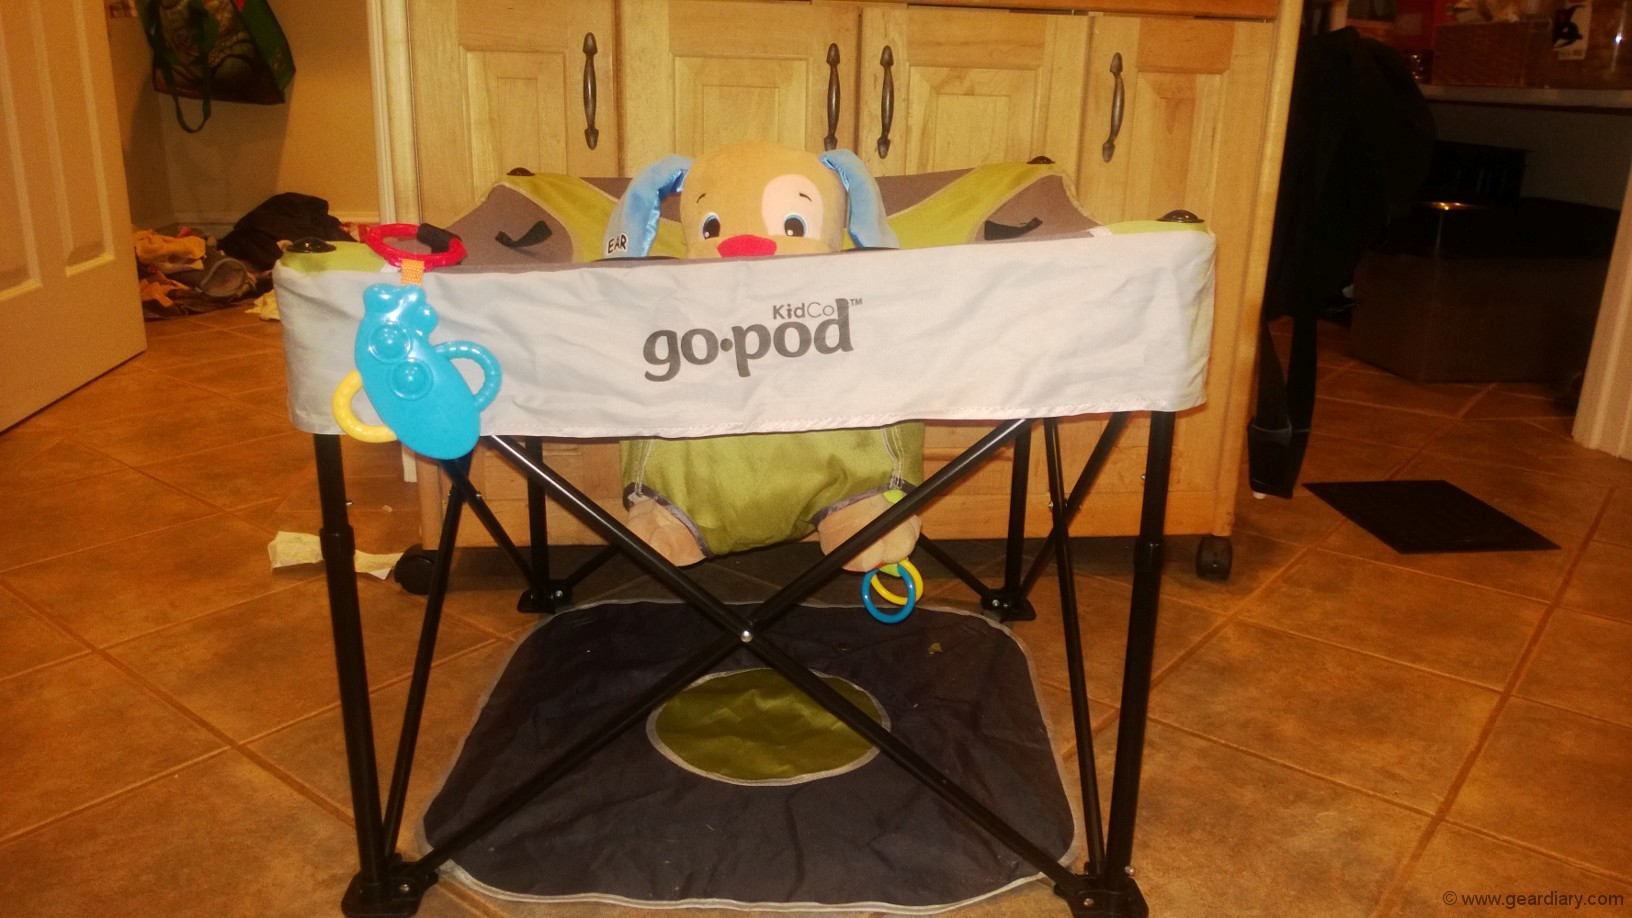 Kidco GoPod Review - a Portable Hangout for Infants that Grows with Your Child